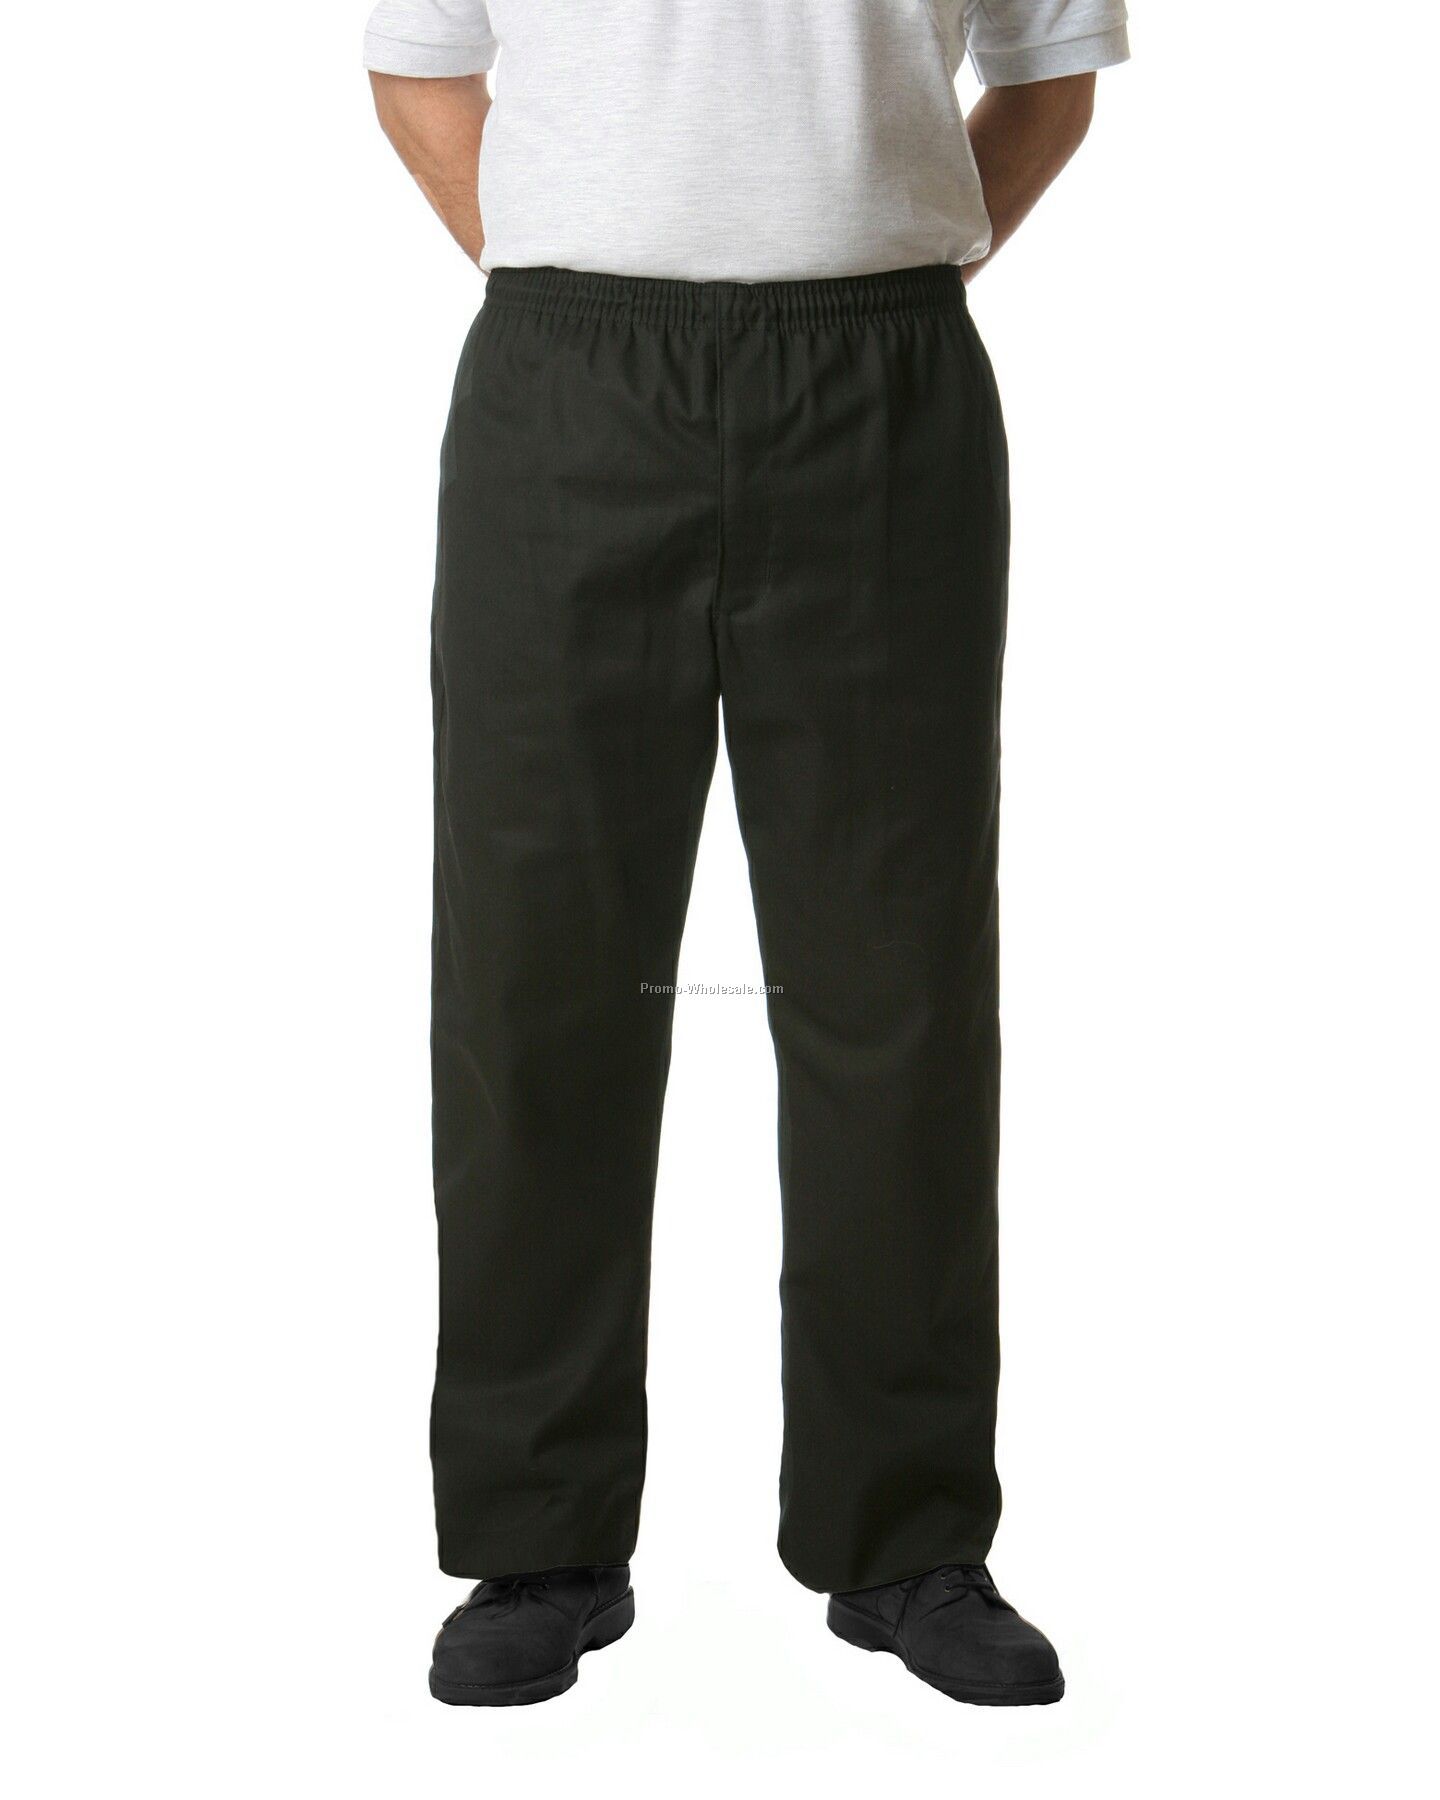 Chef Baggies Pants (Small/ Houndstooth)